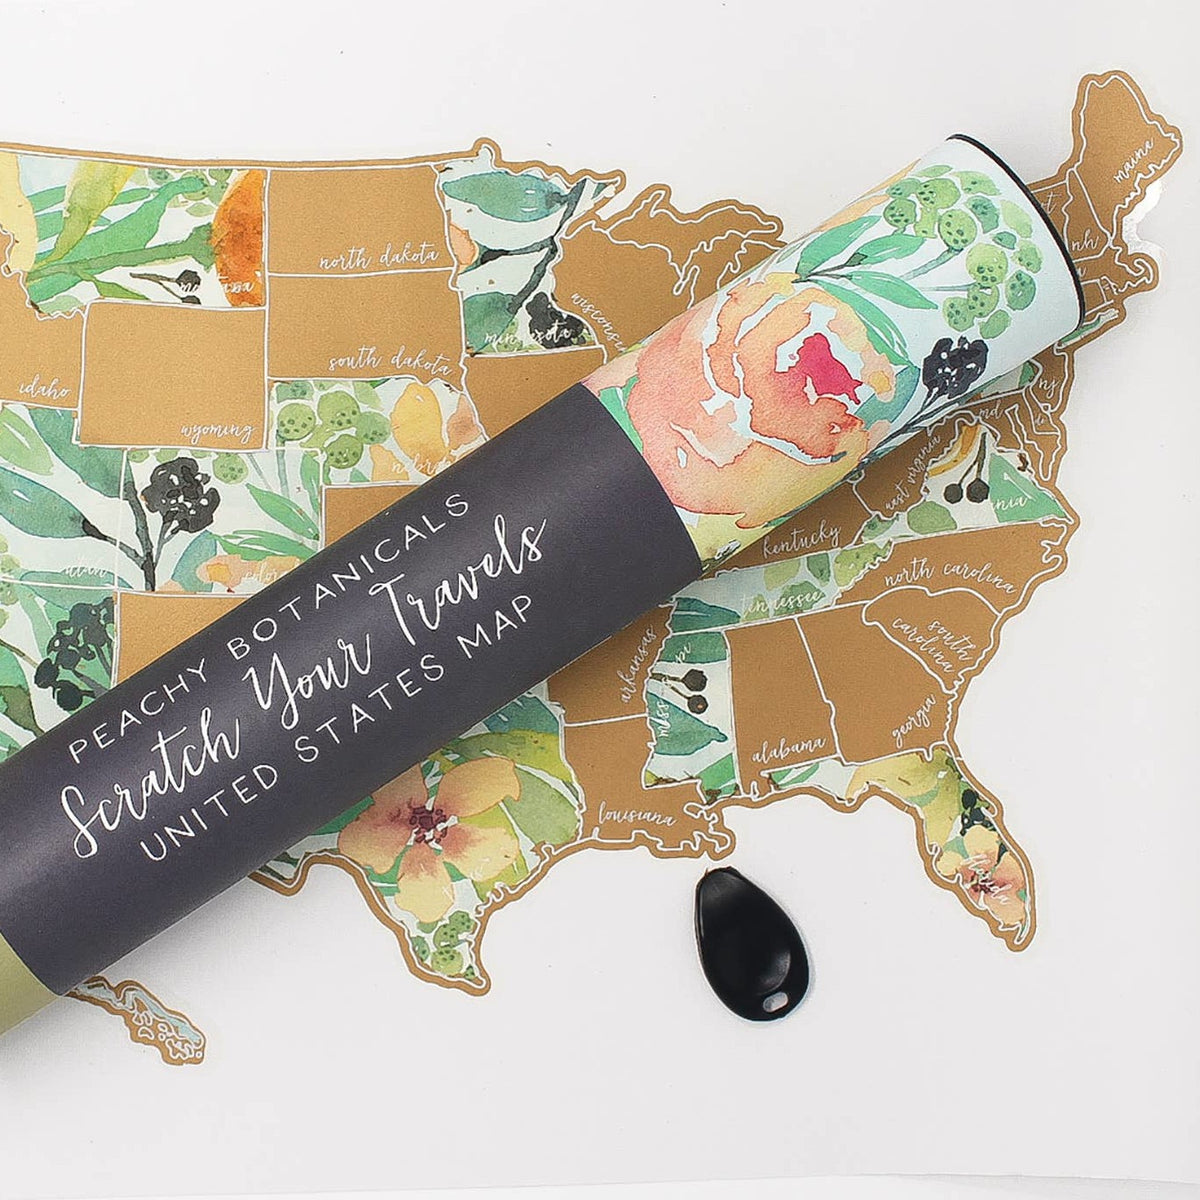 United States scratch off map with a peach botanical print on the states scratched off. Comes in a canister tube.